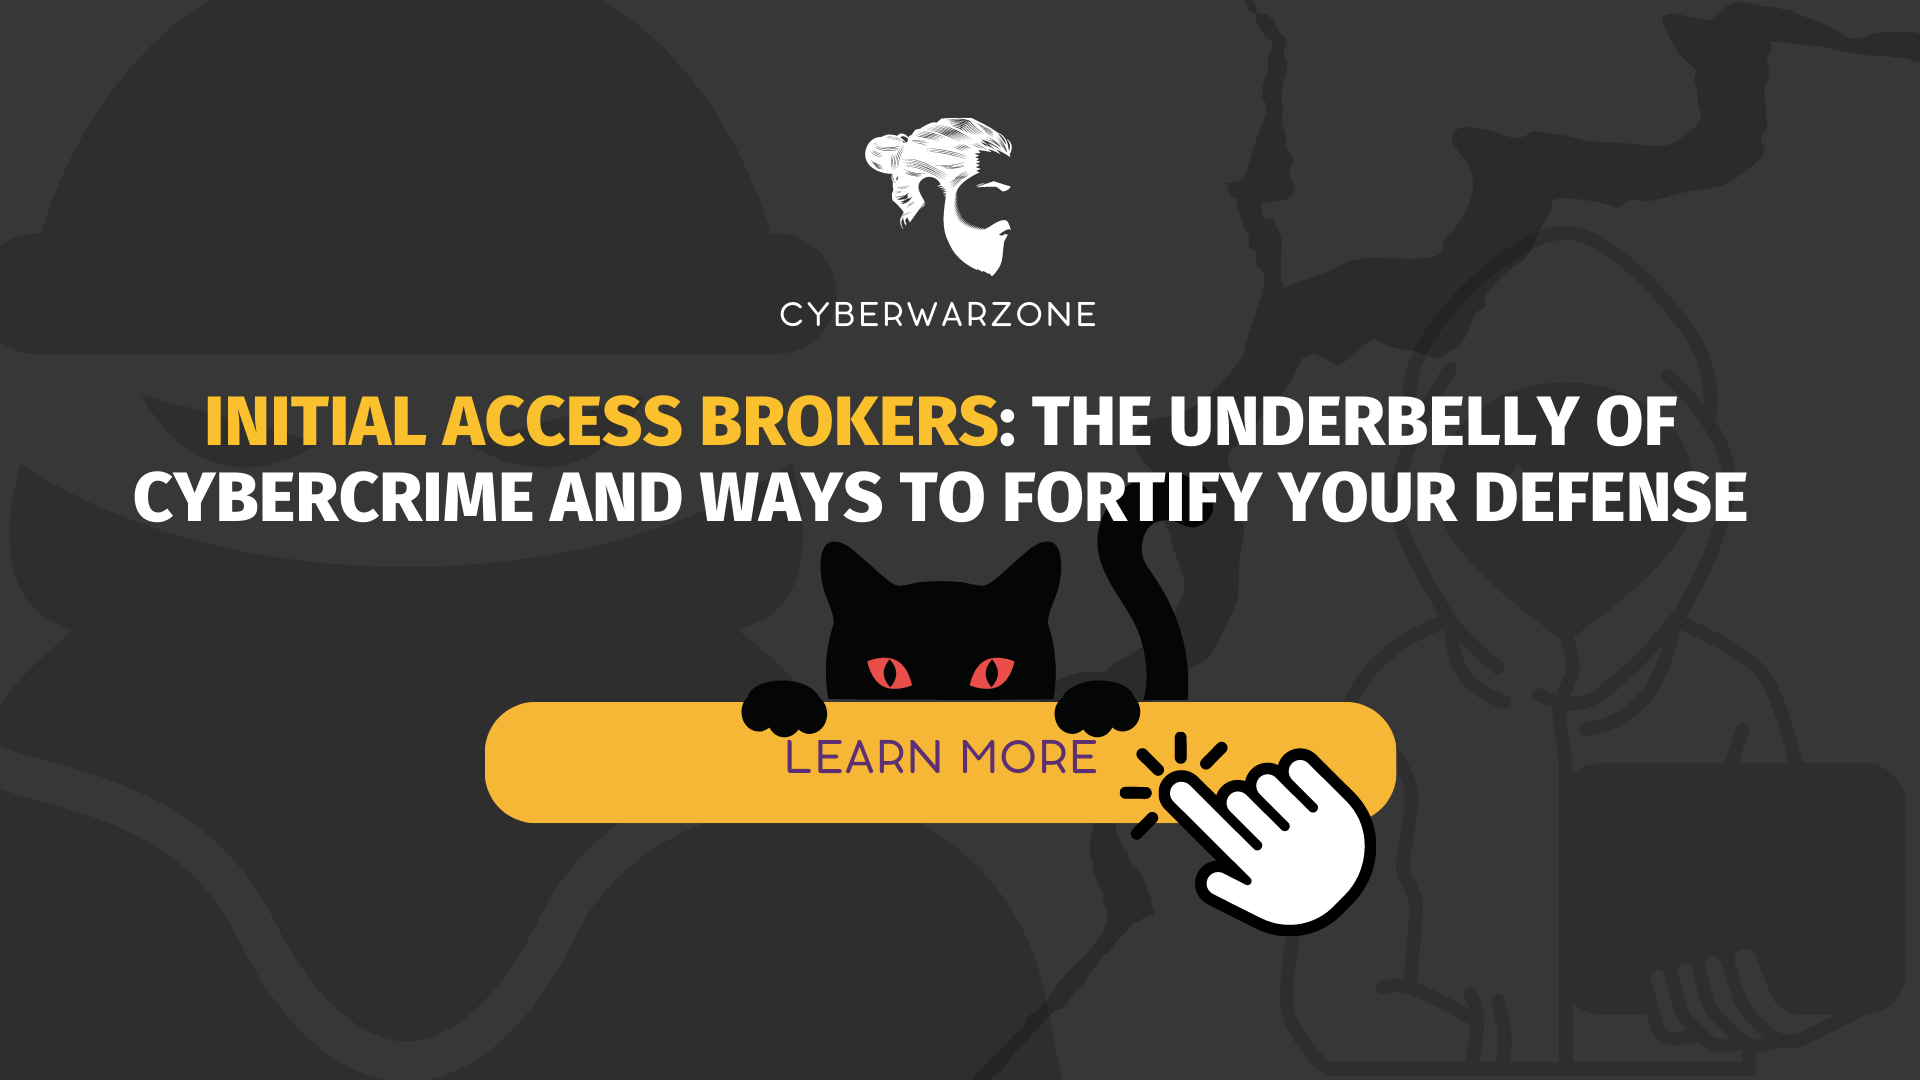 Initial Access Brokers: The Underbelly of Cybercrime and Ways to Fortify Your Defense